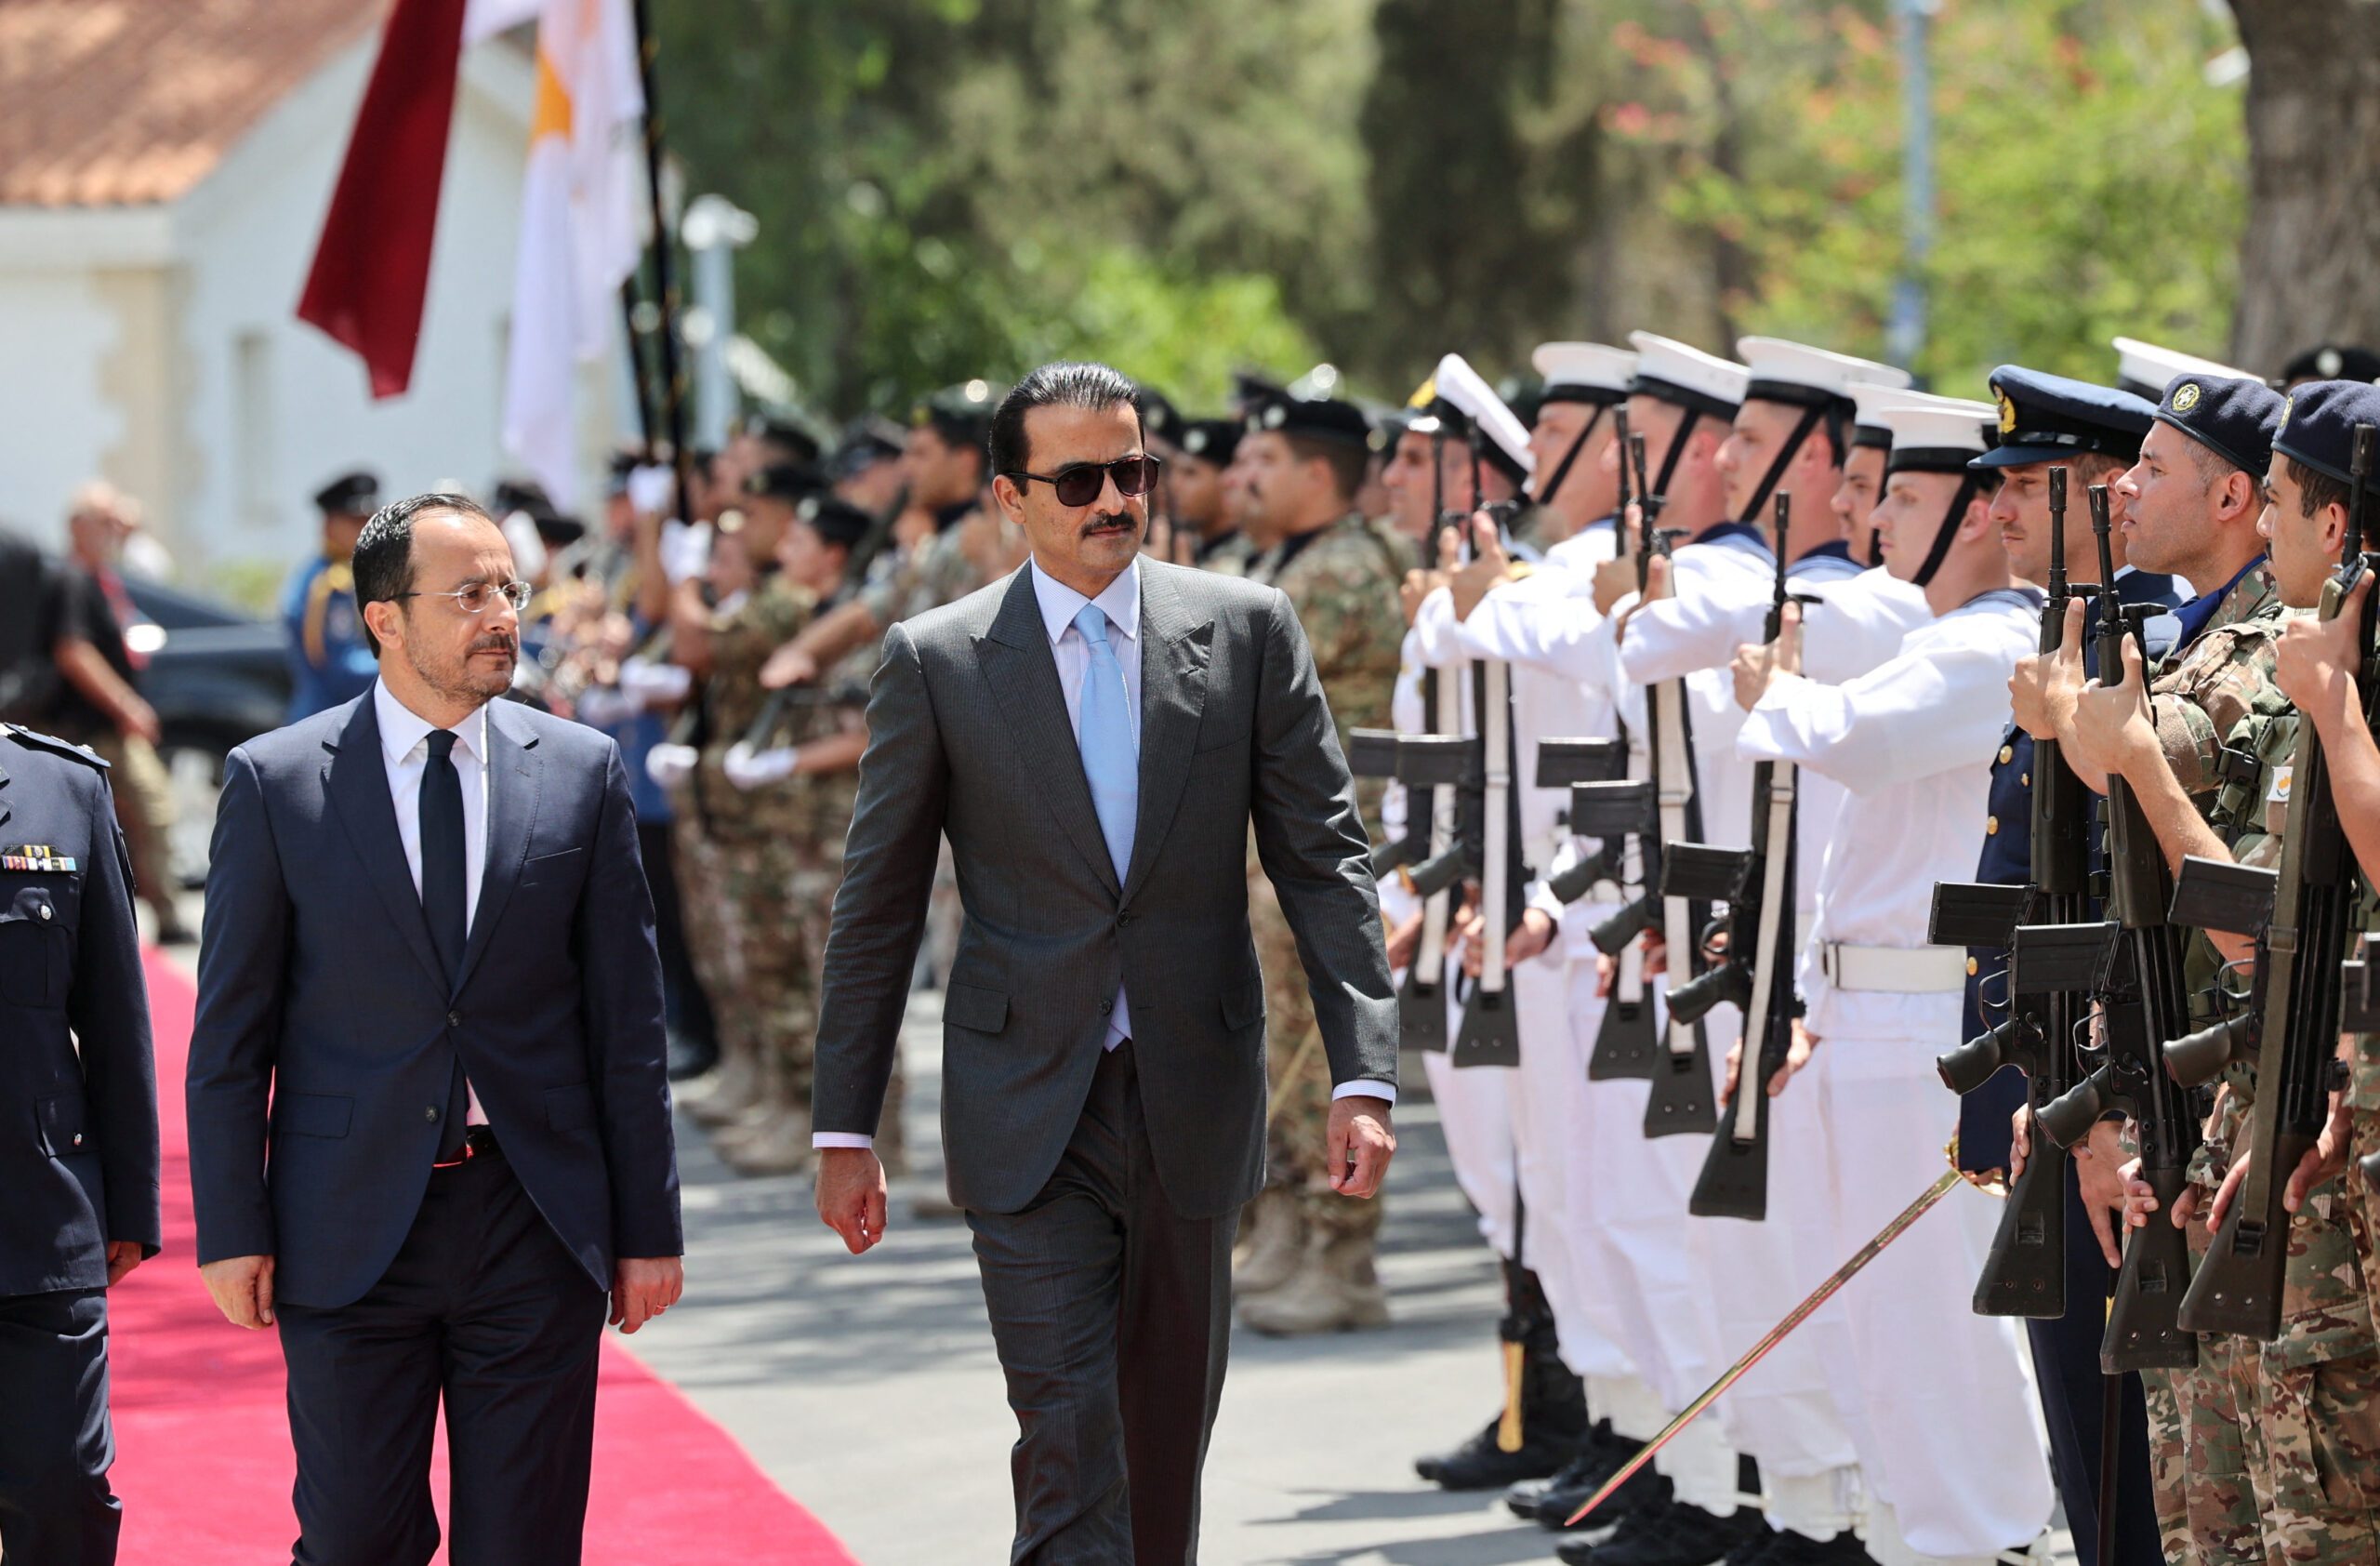 President Nicos Christodoulides and Emir Sheikh Tamim bin Hamad Al Thani at the ceremony to welcome the emir to Cyprus this week